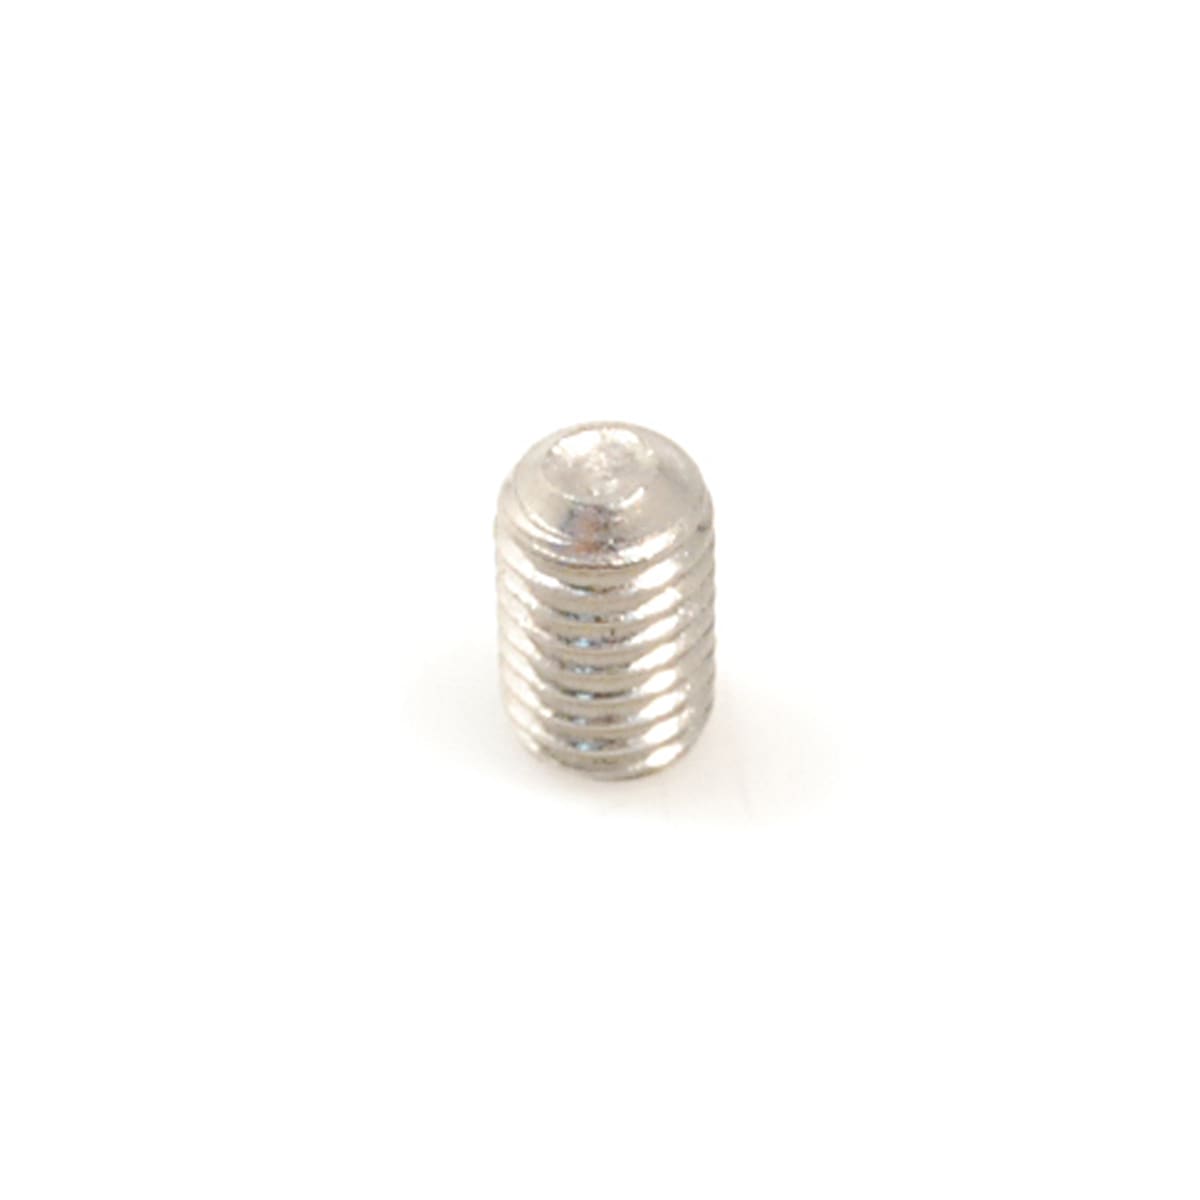 Toto 6bu4019 N A M5x8l Mounting Set Screw For Mercer And Clayton